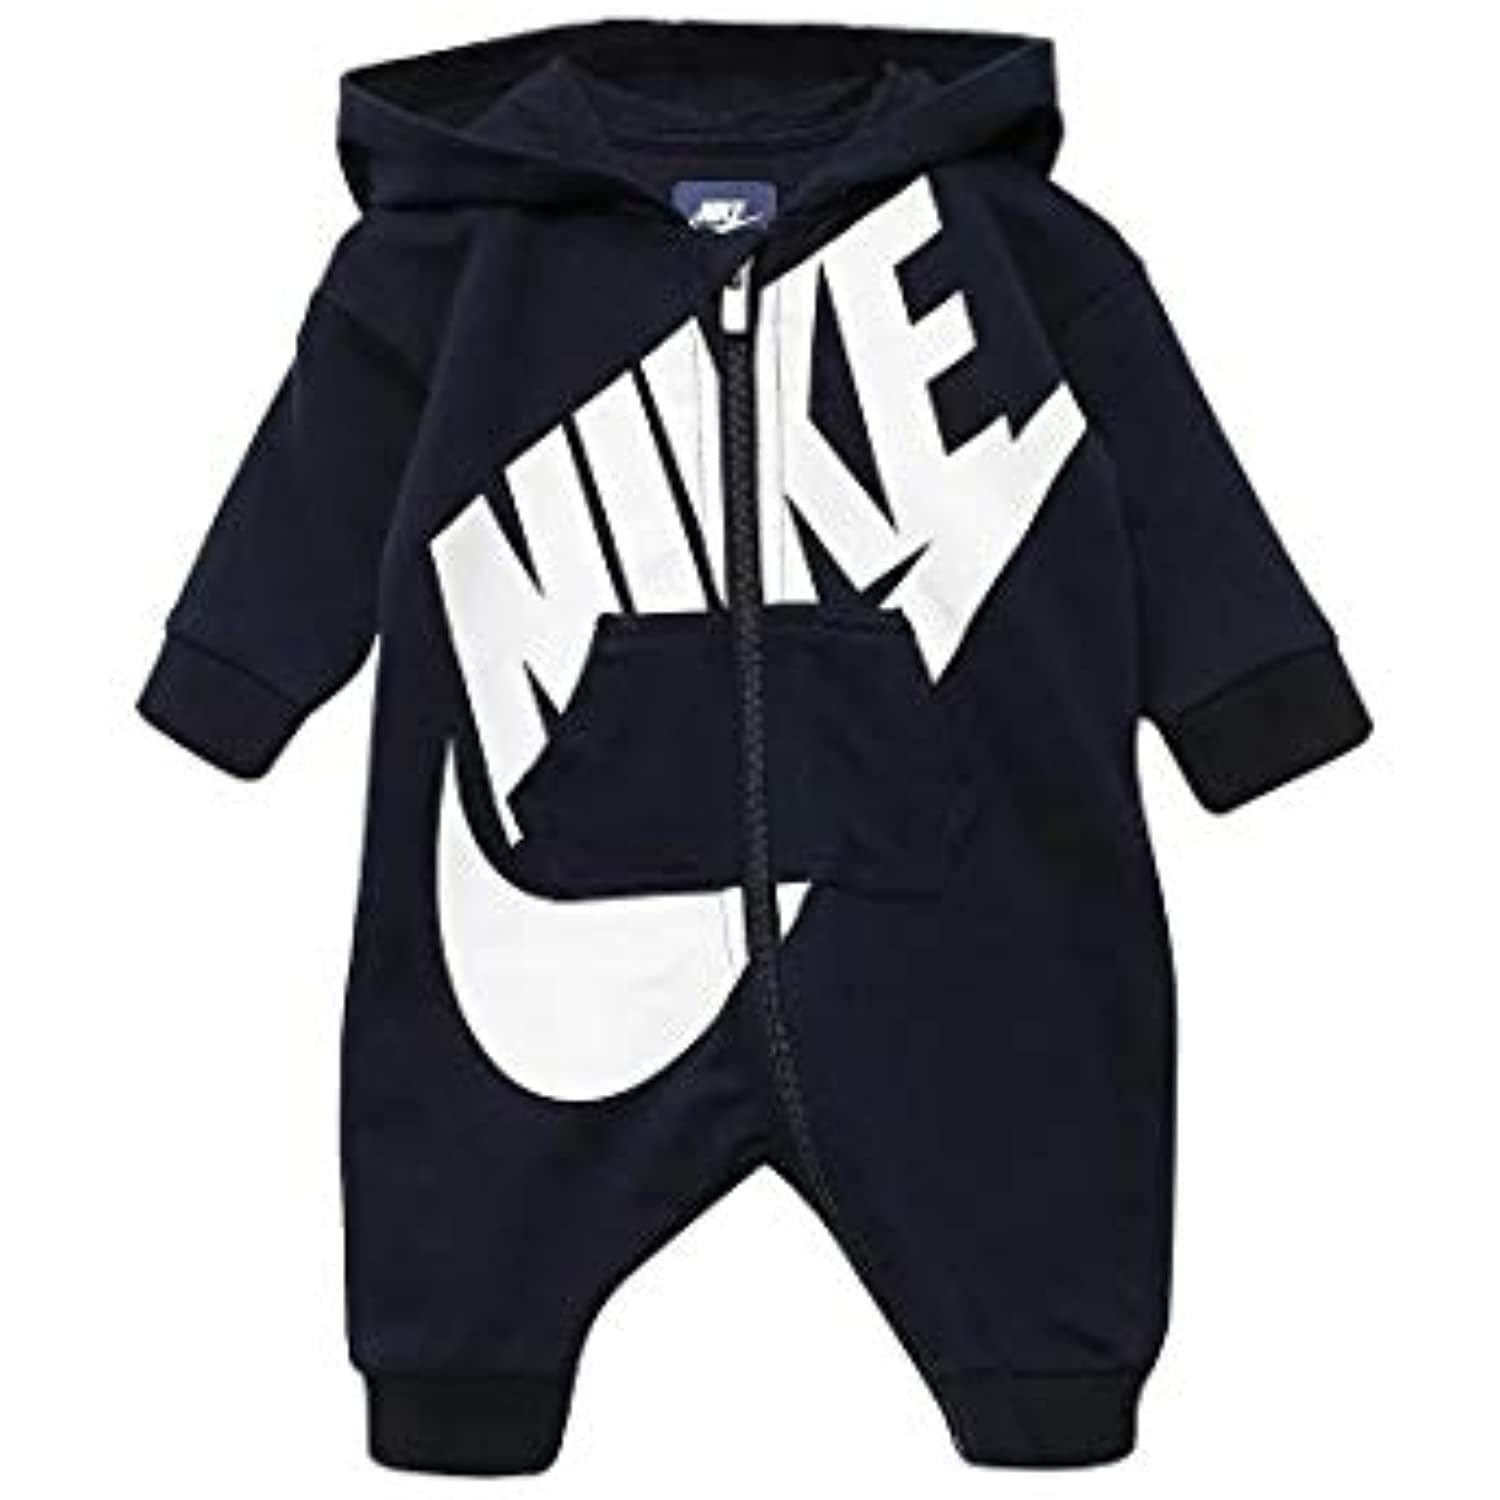 Nike Infant Futura Coverall Romper (12 Months, Obsidian (695) / White/ Obsidian)